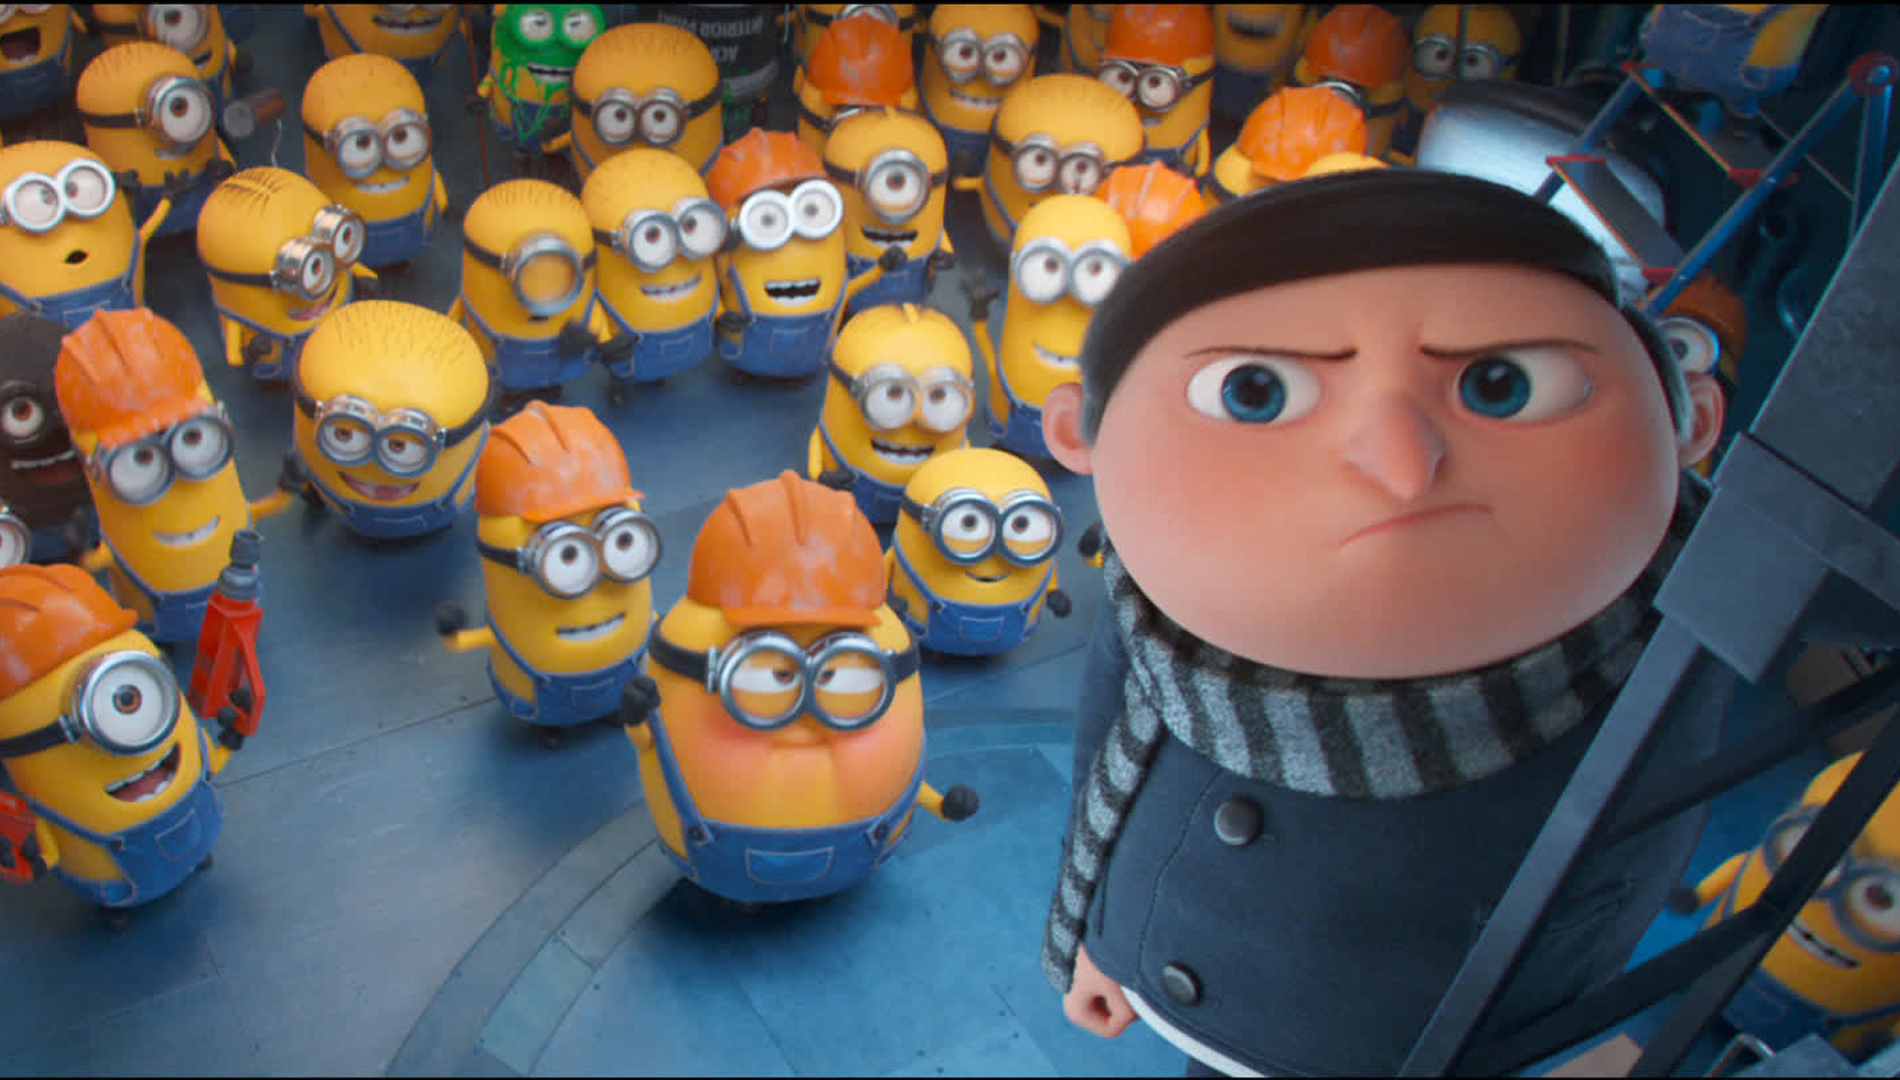 Free download Anime Wallpapers Despicable Me 2 Minions Wallpapers 7665  1920x1080 [1280x1024] for your Desktop, Mobile & Tablet | Explore 47+ Despicable  Me Minions Wallpaper 1280x1024 | Despicable Me Wallpapers, Minions  Despicable